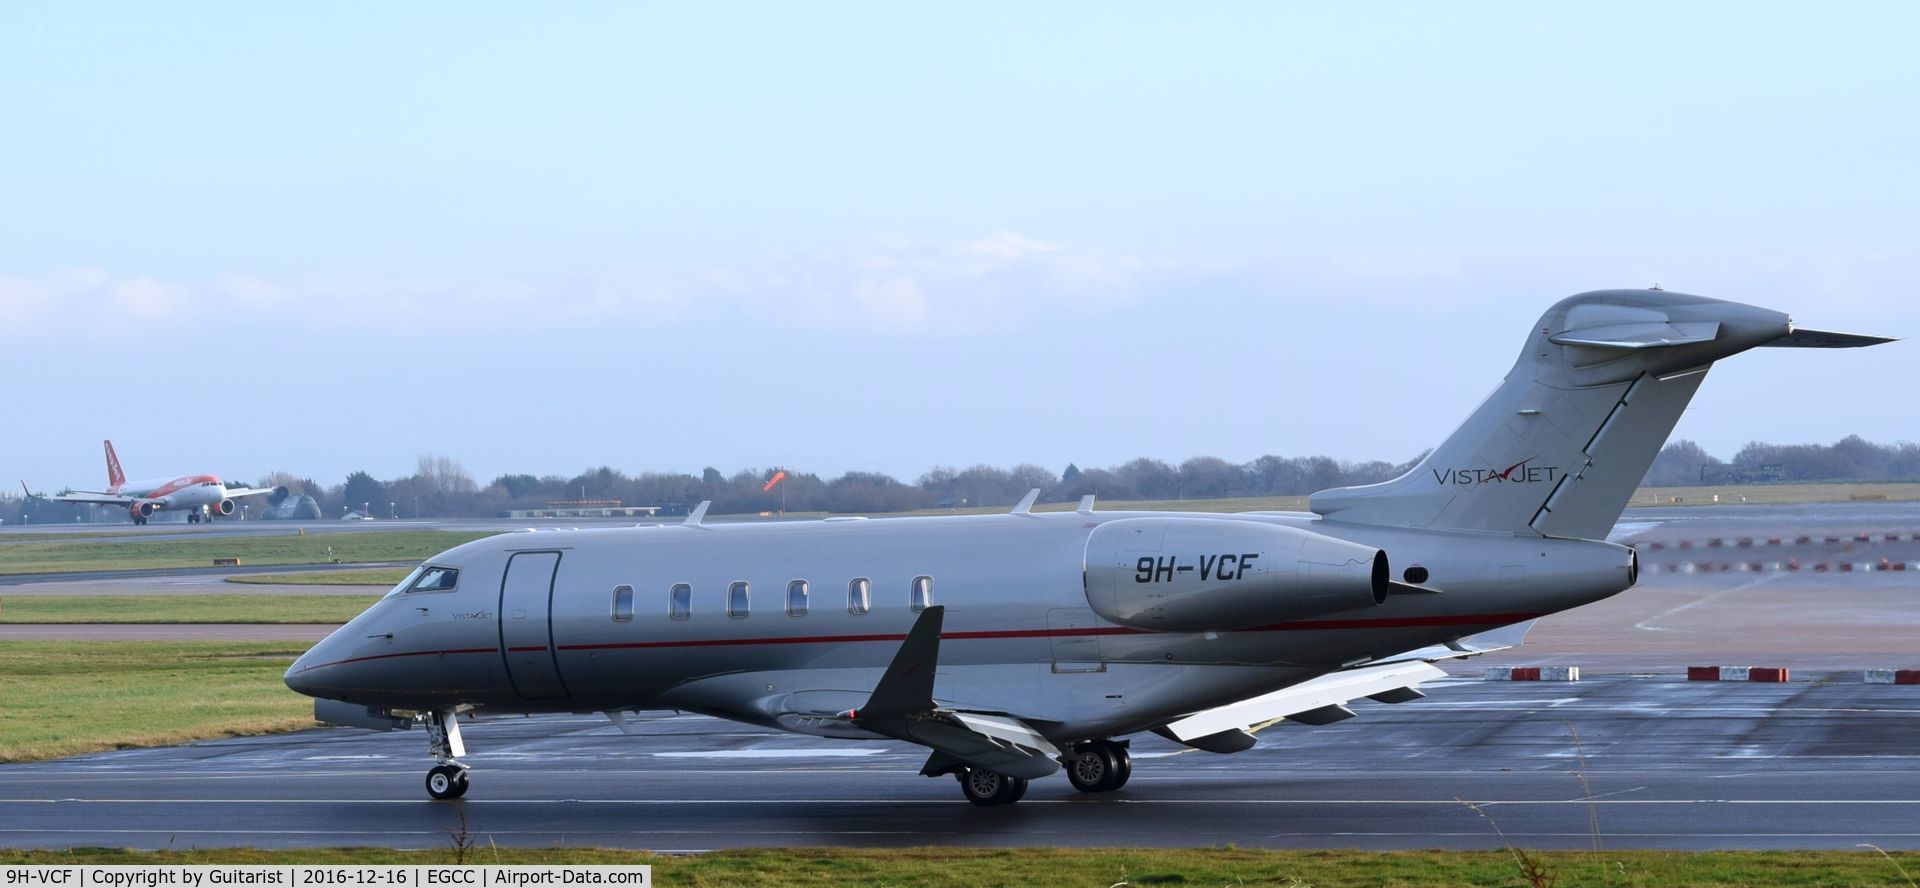 9H-VCF, 2014 Bombardier Challenger 350 (BD-100-1A10) C/N 20541, At Manchester